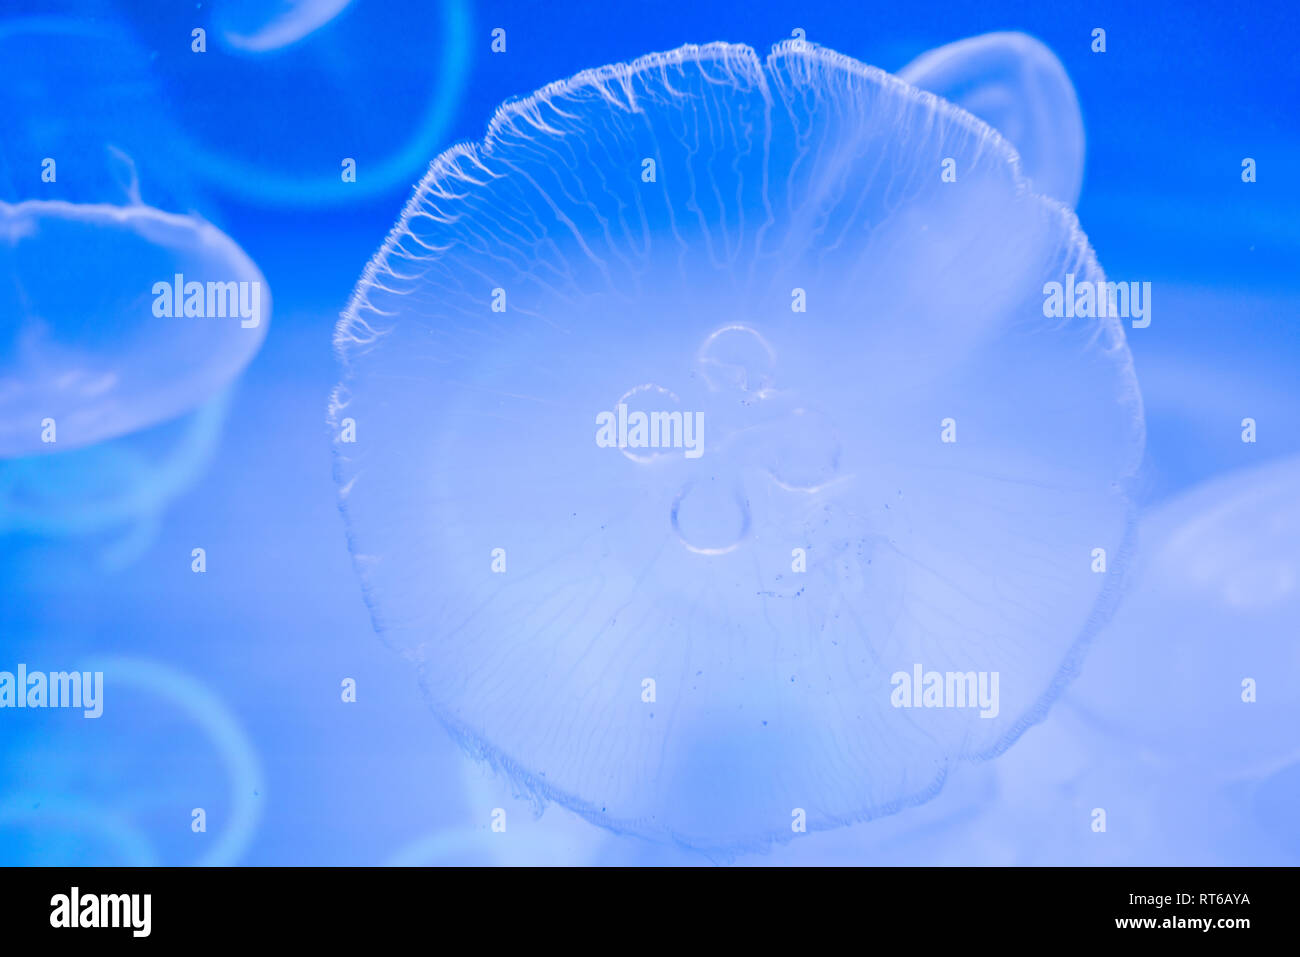 Small jellyfish in a decorative aquarium with blue backlight. Stock Photo